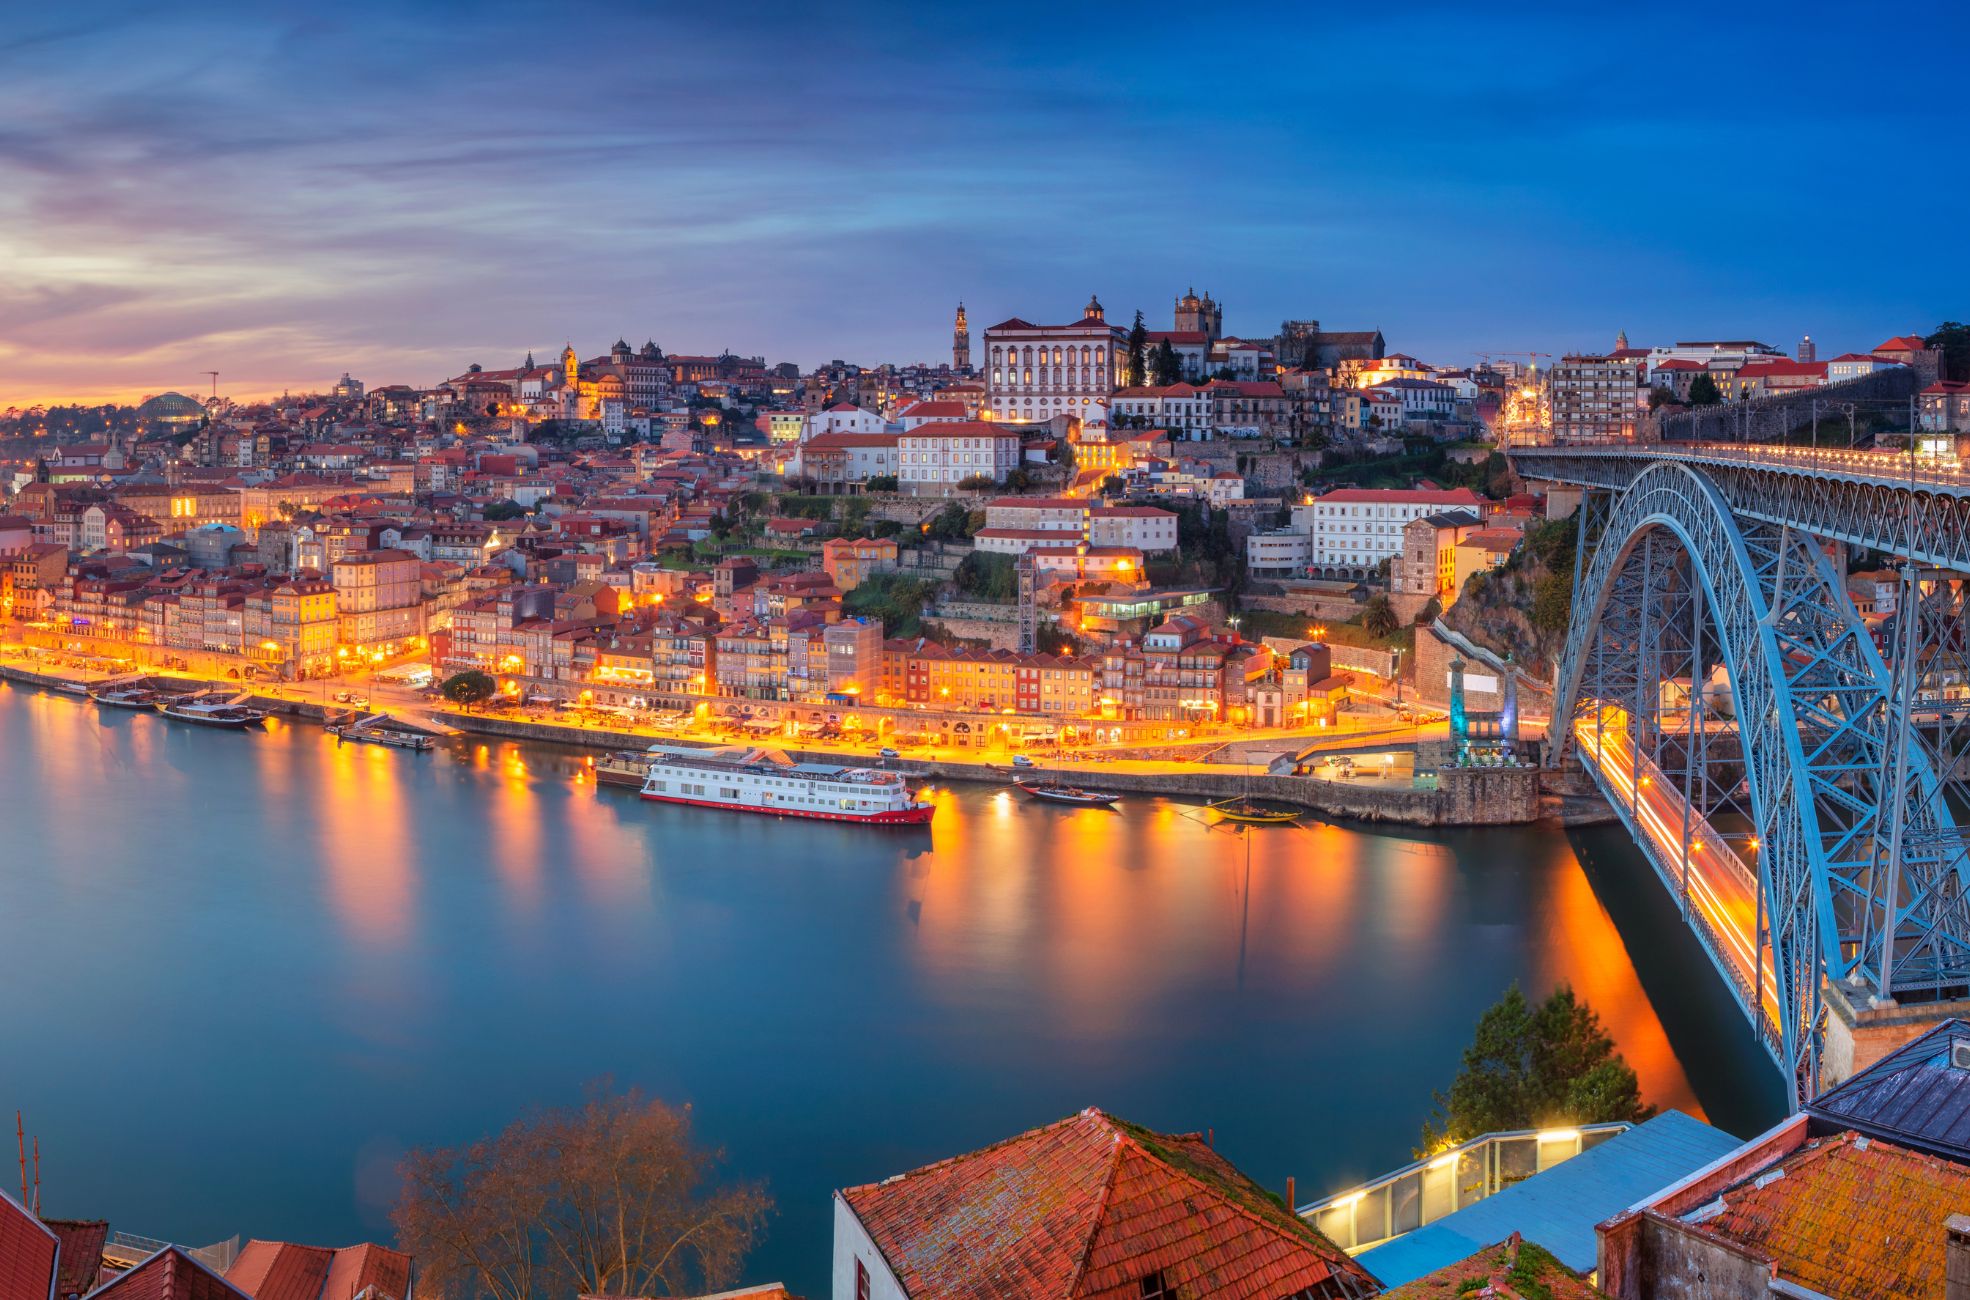 Night Photo In Portugal With Waterfront